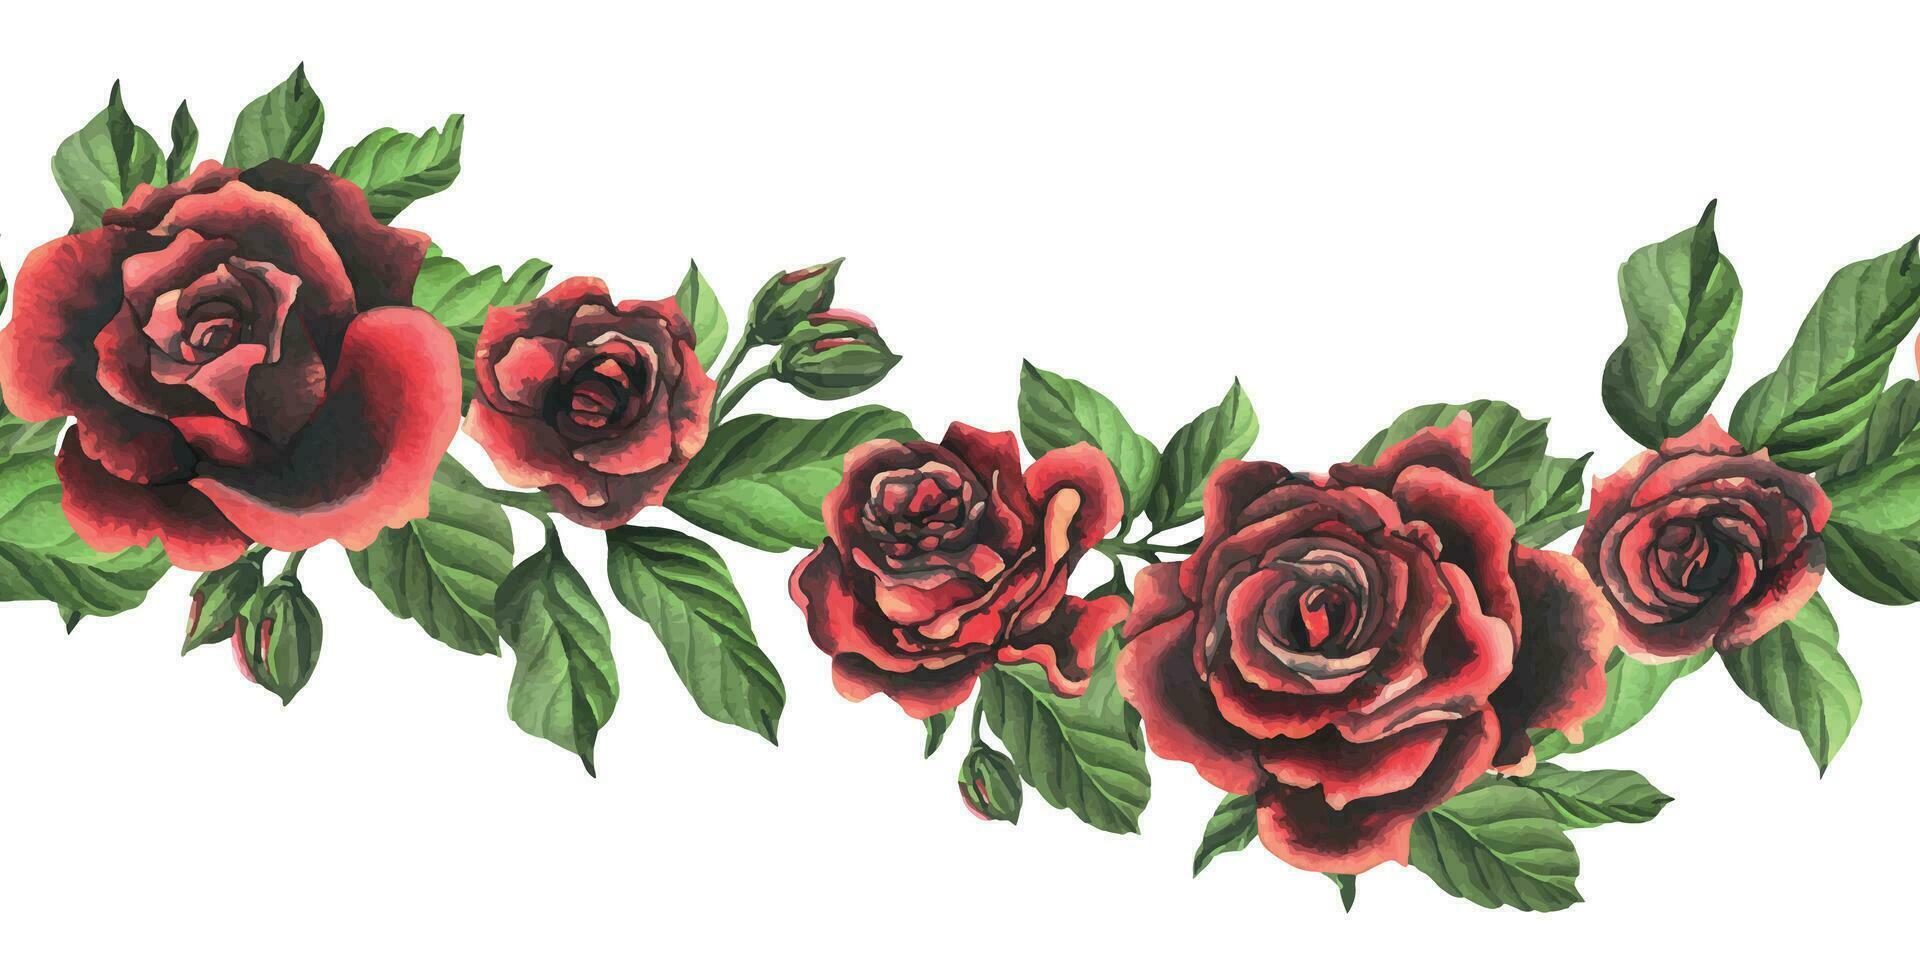 Redblack rose flowers with green leaves and buds, chic, bright, beautiful. Hand drawn watercolor illustration. Seamless border a white background, for decoration and design. vector